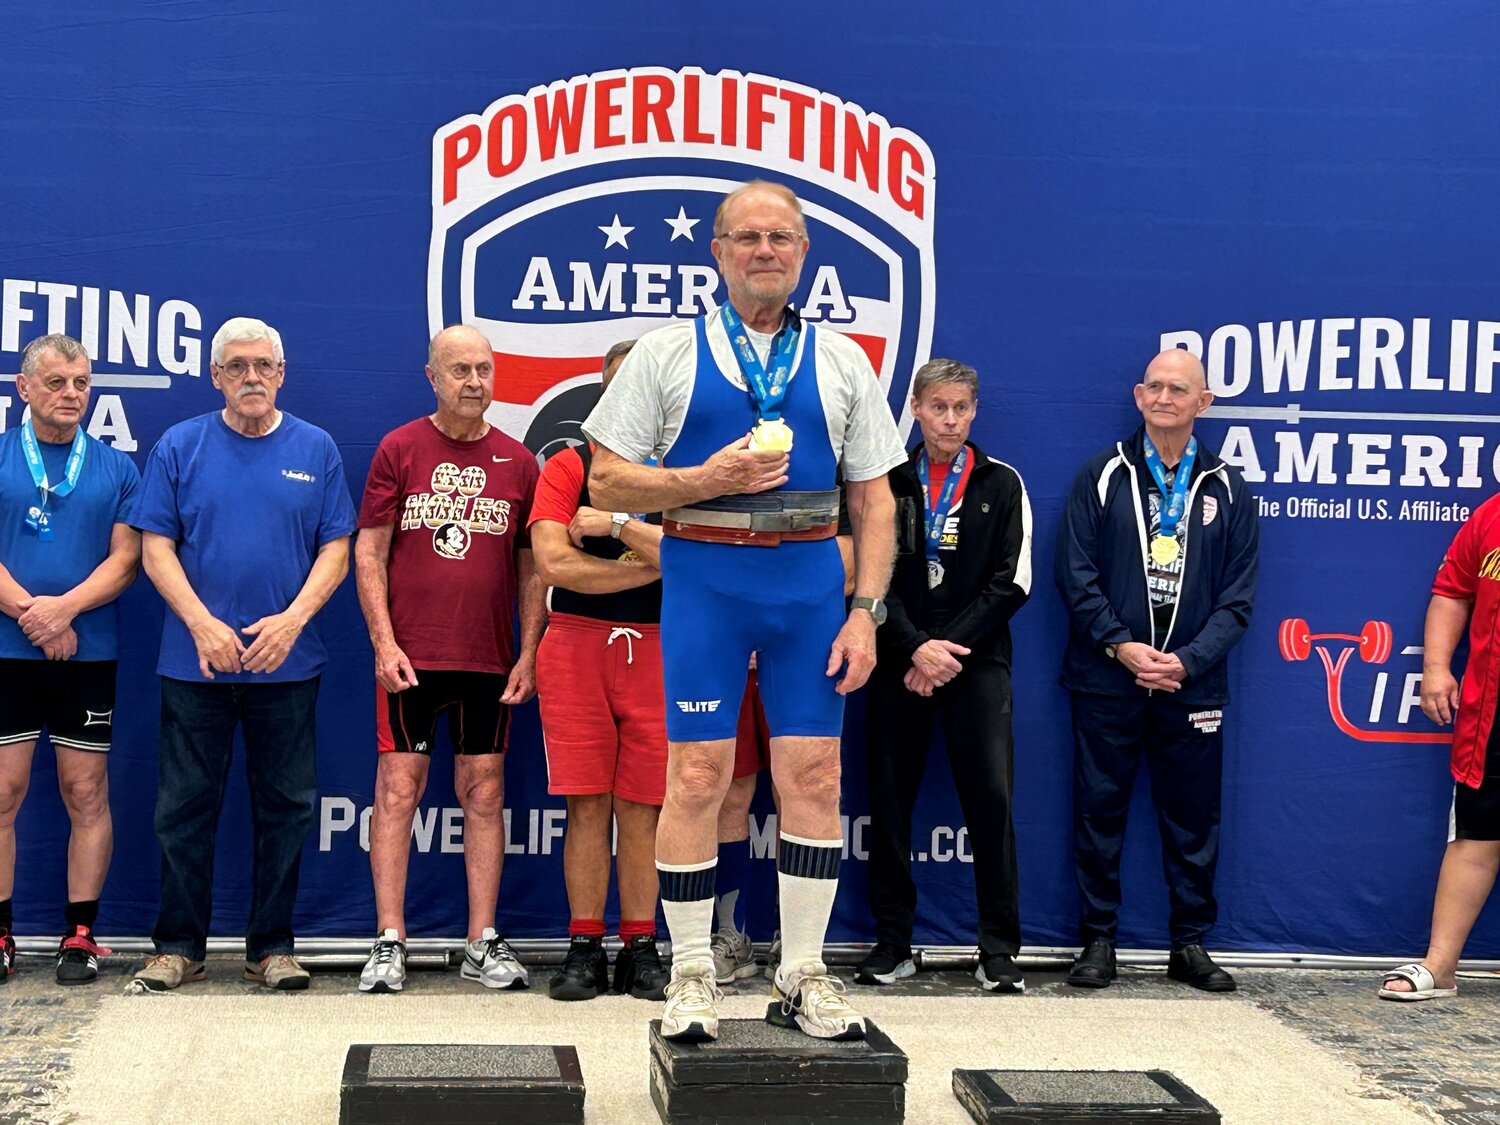 David Parsons, 81, won his 81st gold medal in powerlifting at the Florida Senior Games on Dec. 11.